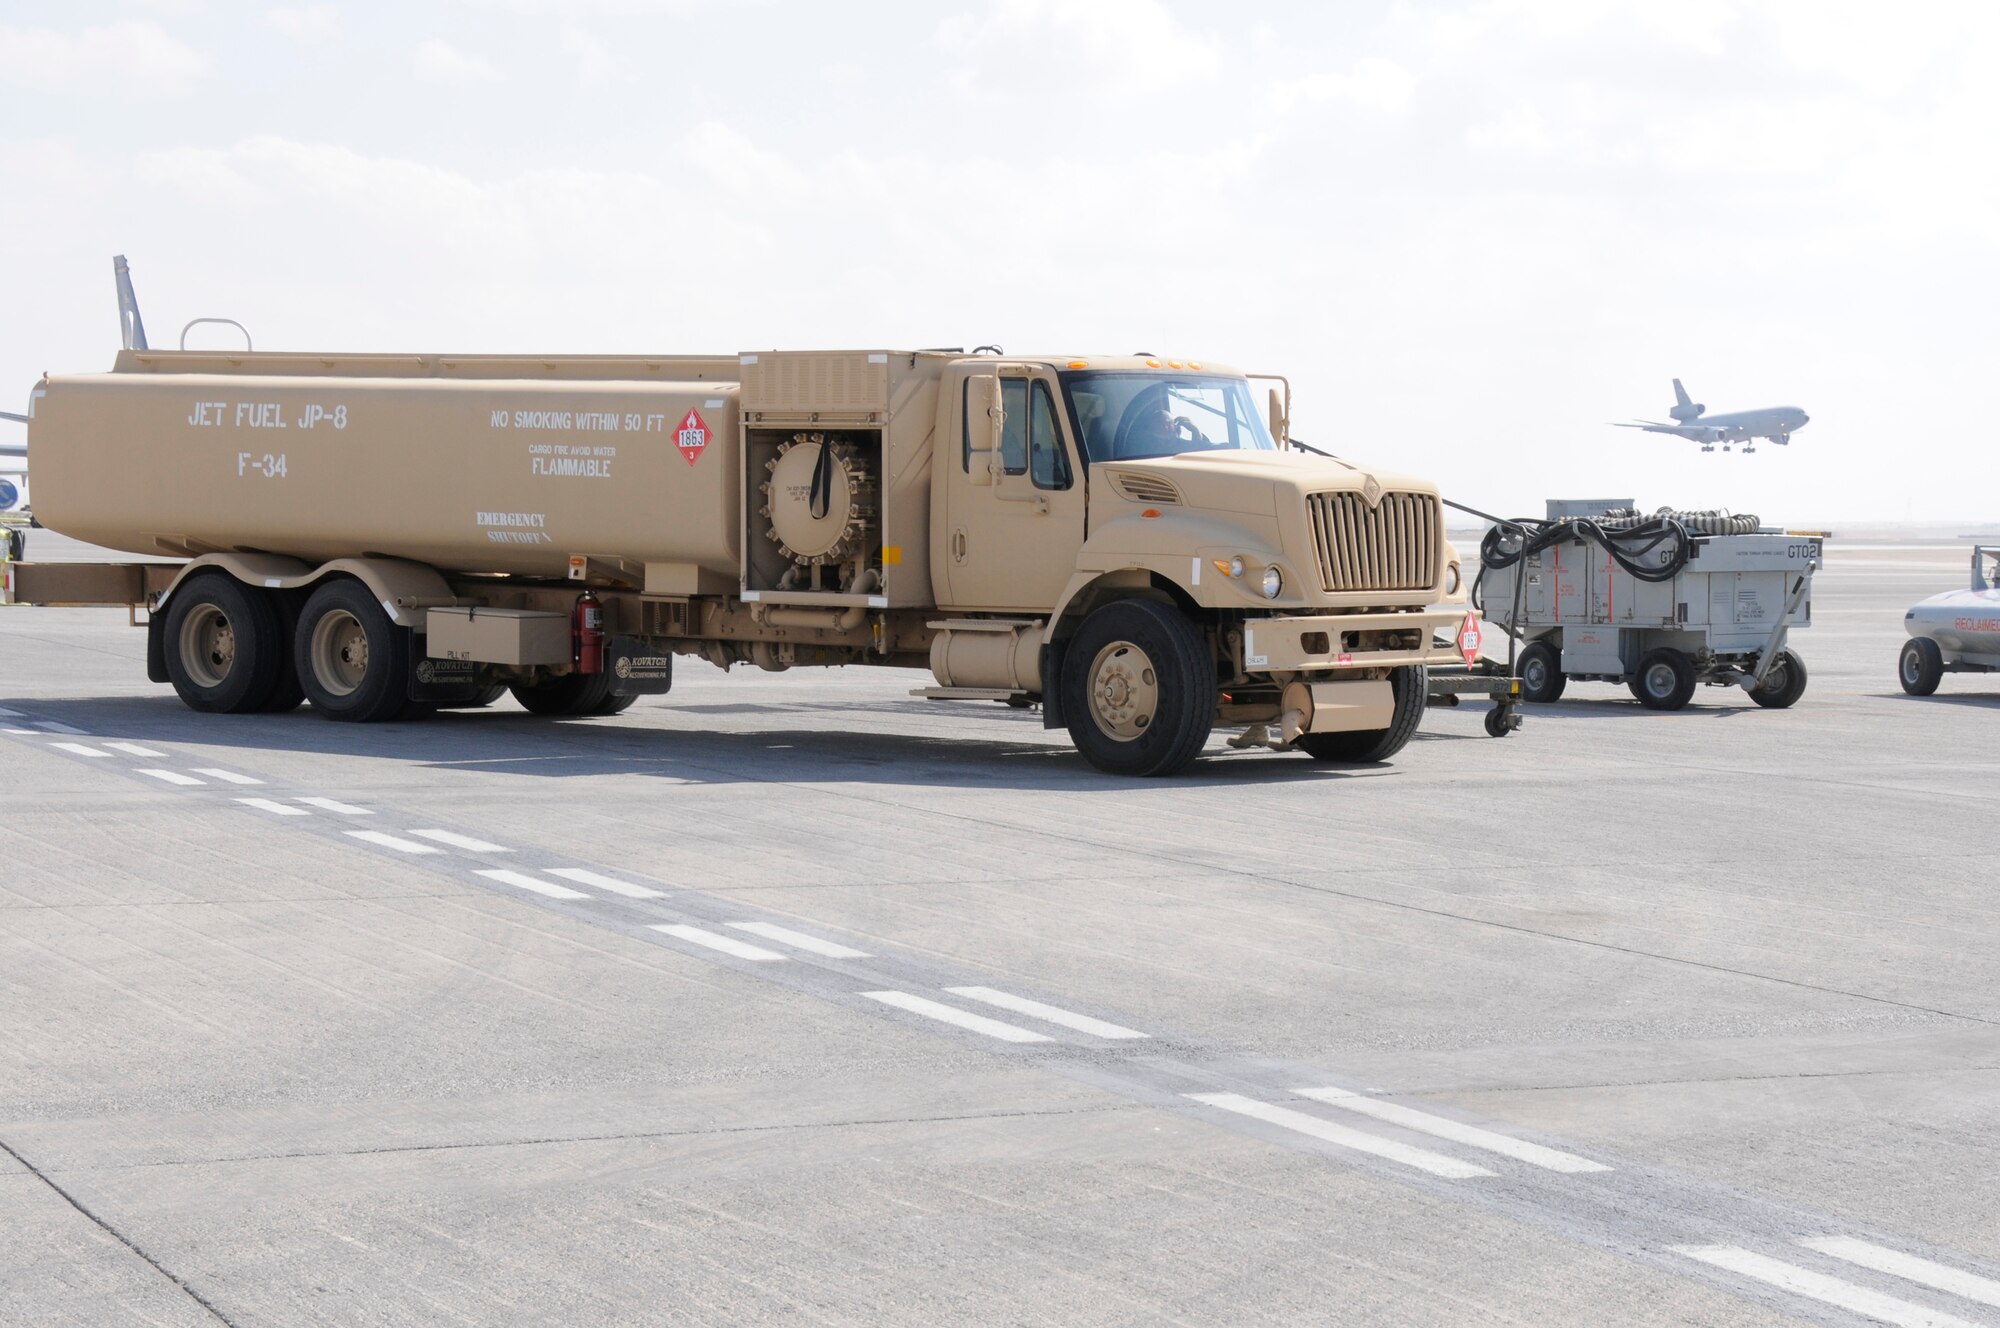 SOUTHWEST ASIA -- A KC-10 Extender comes in for a landing while Airman 1st Class Brian Holley, 380th Expeditionary Logistics Readiness Squadron fuels operator waits to be ushered in to refuel an E-3 Sentry, Jan 21. Airman Holley is behind the wheel of an R-11 fuels truck which holds 6,000 gallons of fuel. The E-3 Sentry takes 20,000 gallons to refuel when completely empty. Airman Holley is deployed from the 178th Fighter Wing, Ohio Air National Guard and is from Dayton, OH. (U.S. Air Force photo by Senior Airman Brian J. Ellis) (Released)